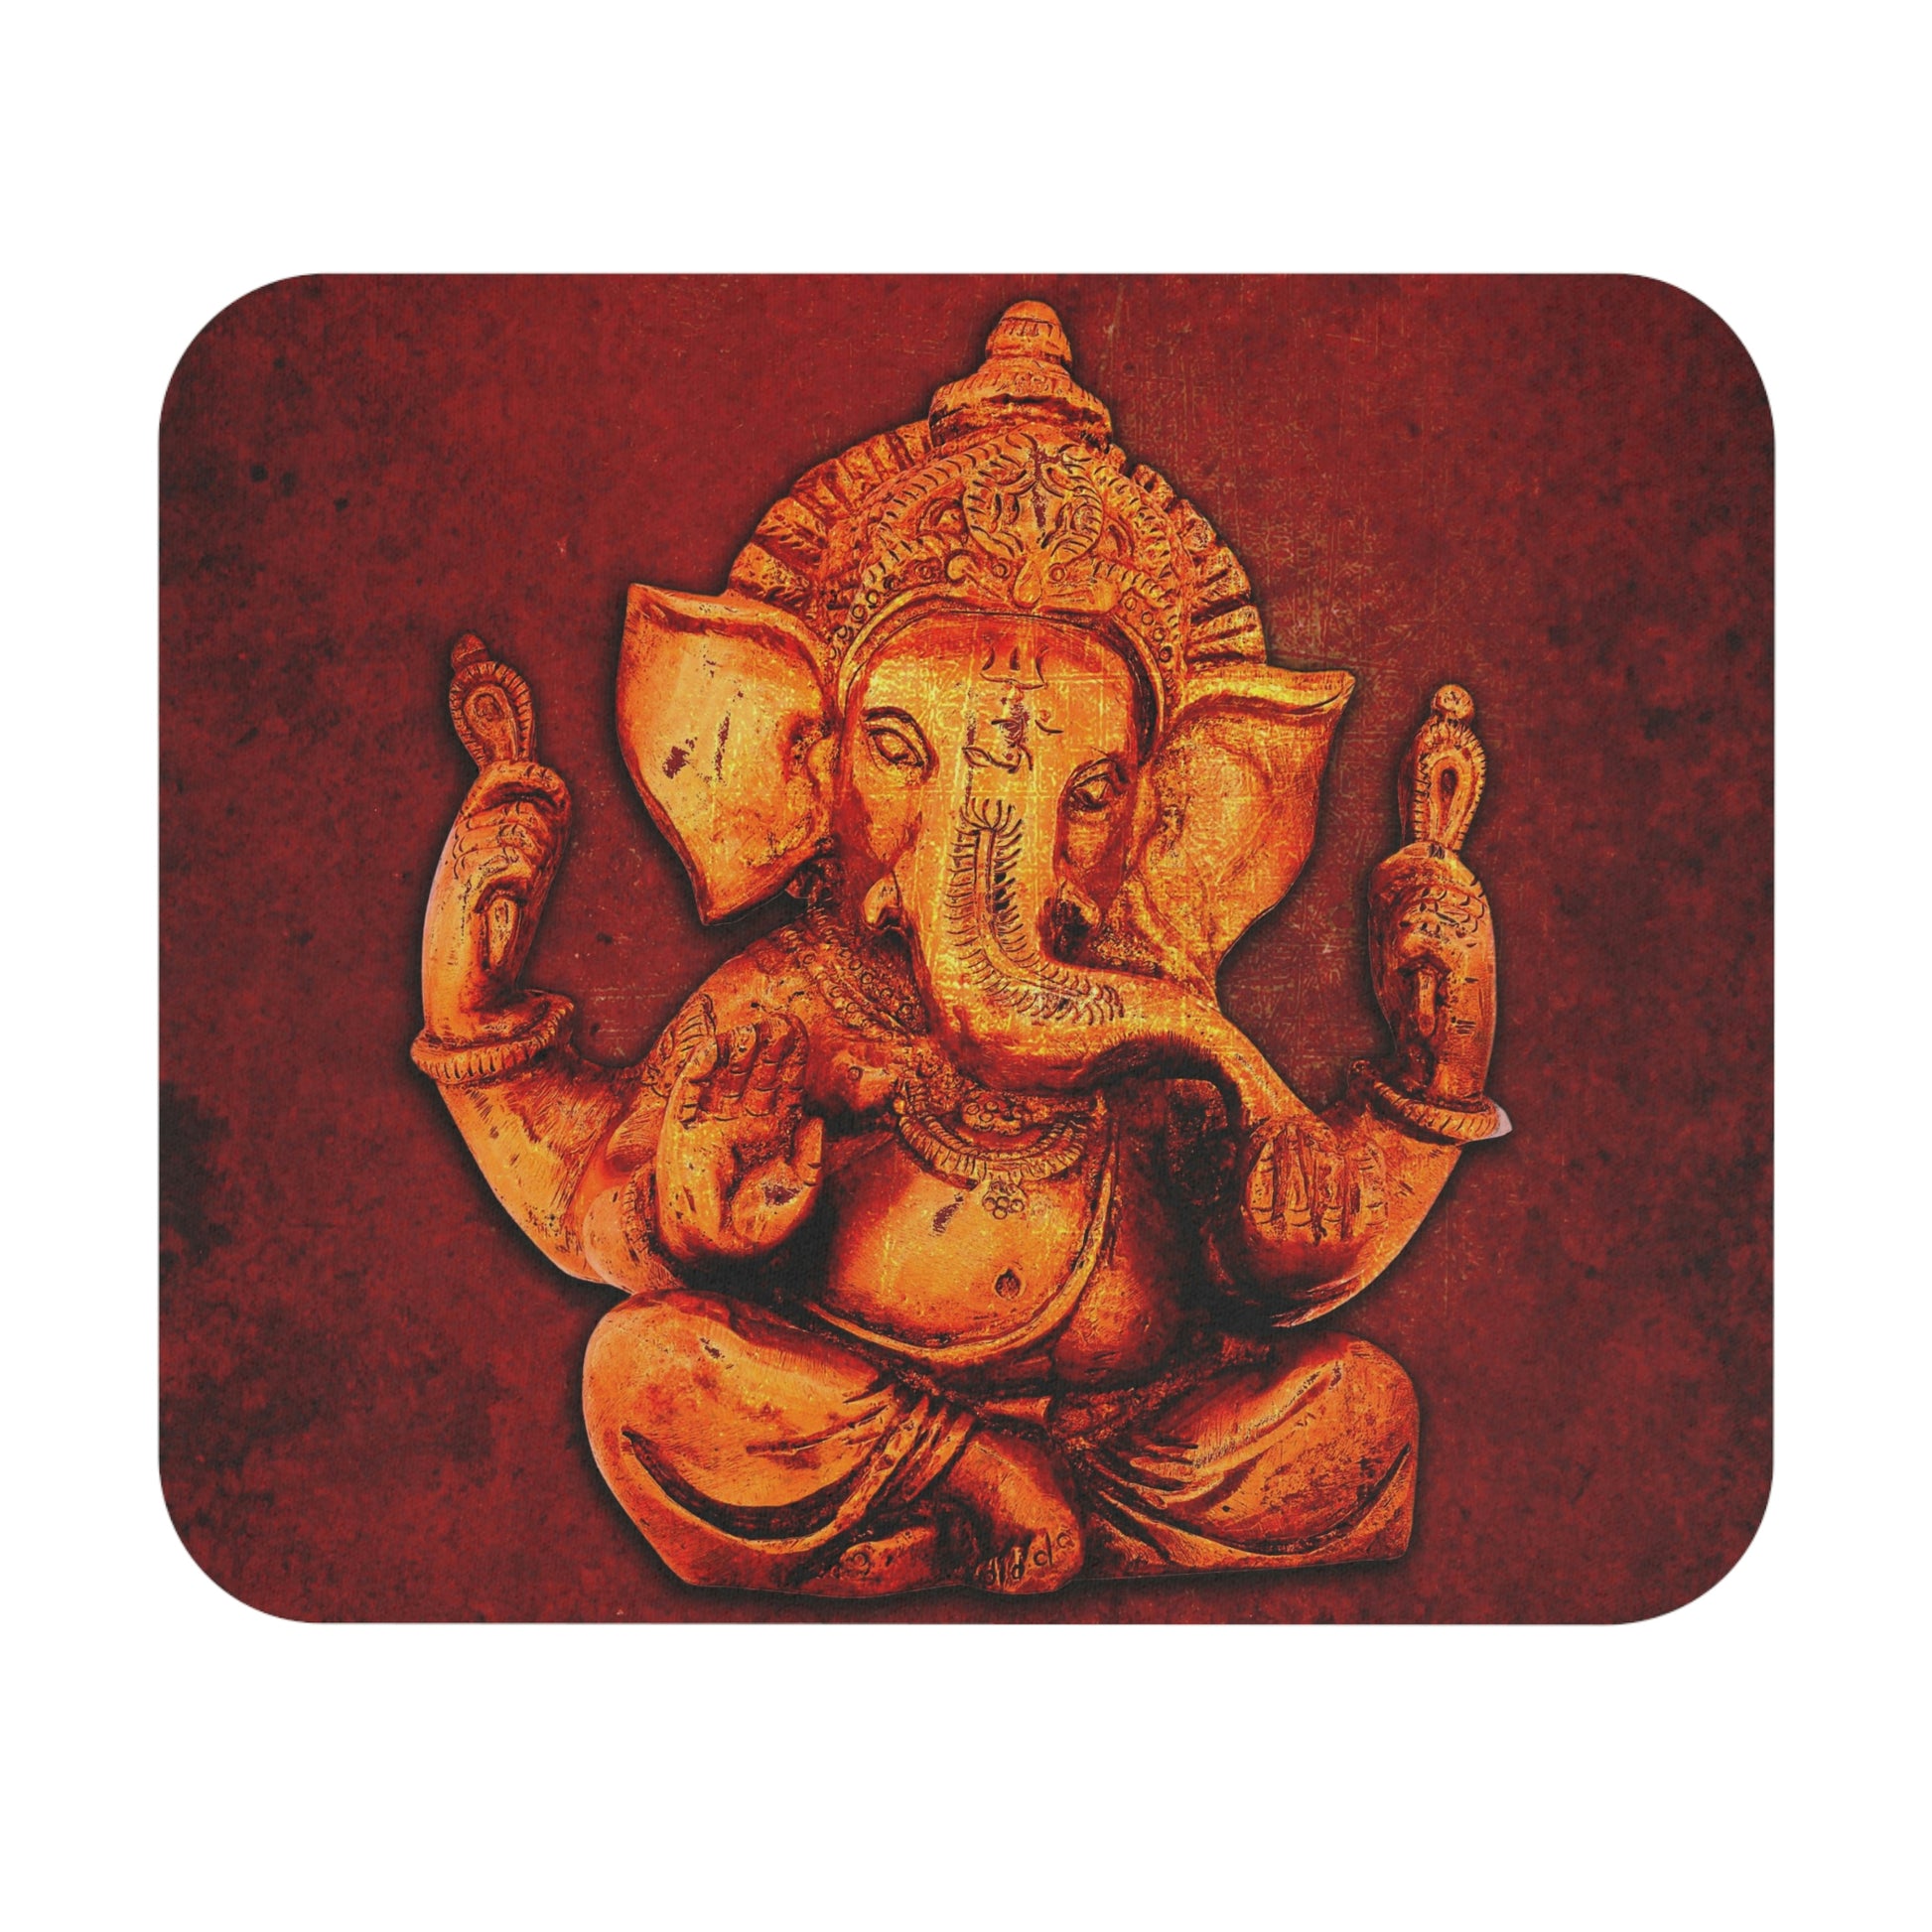 Hindu Deities Themed Desk Accessories - Gold Ganesha on Lava Red Background Print on Mouse Pad